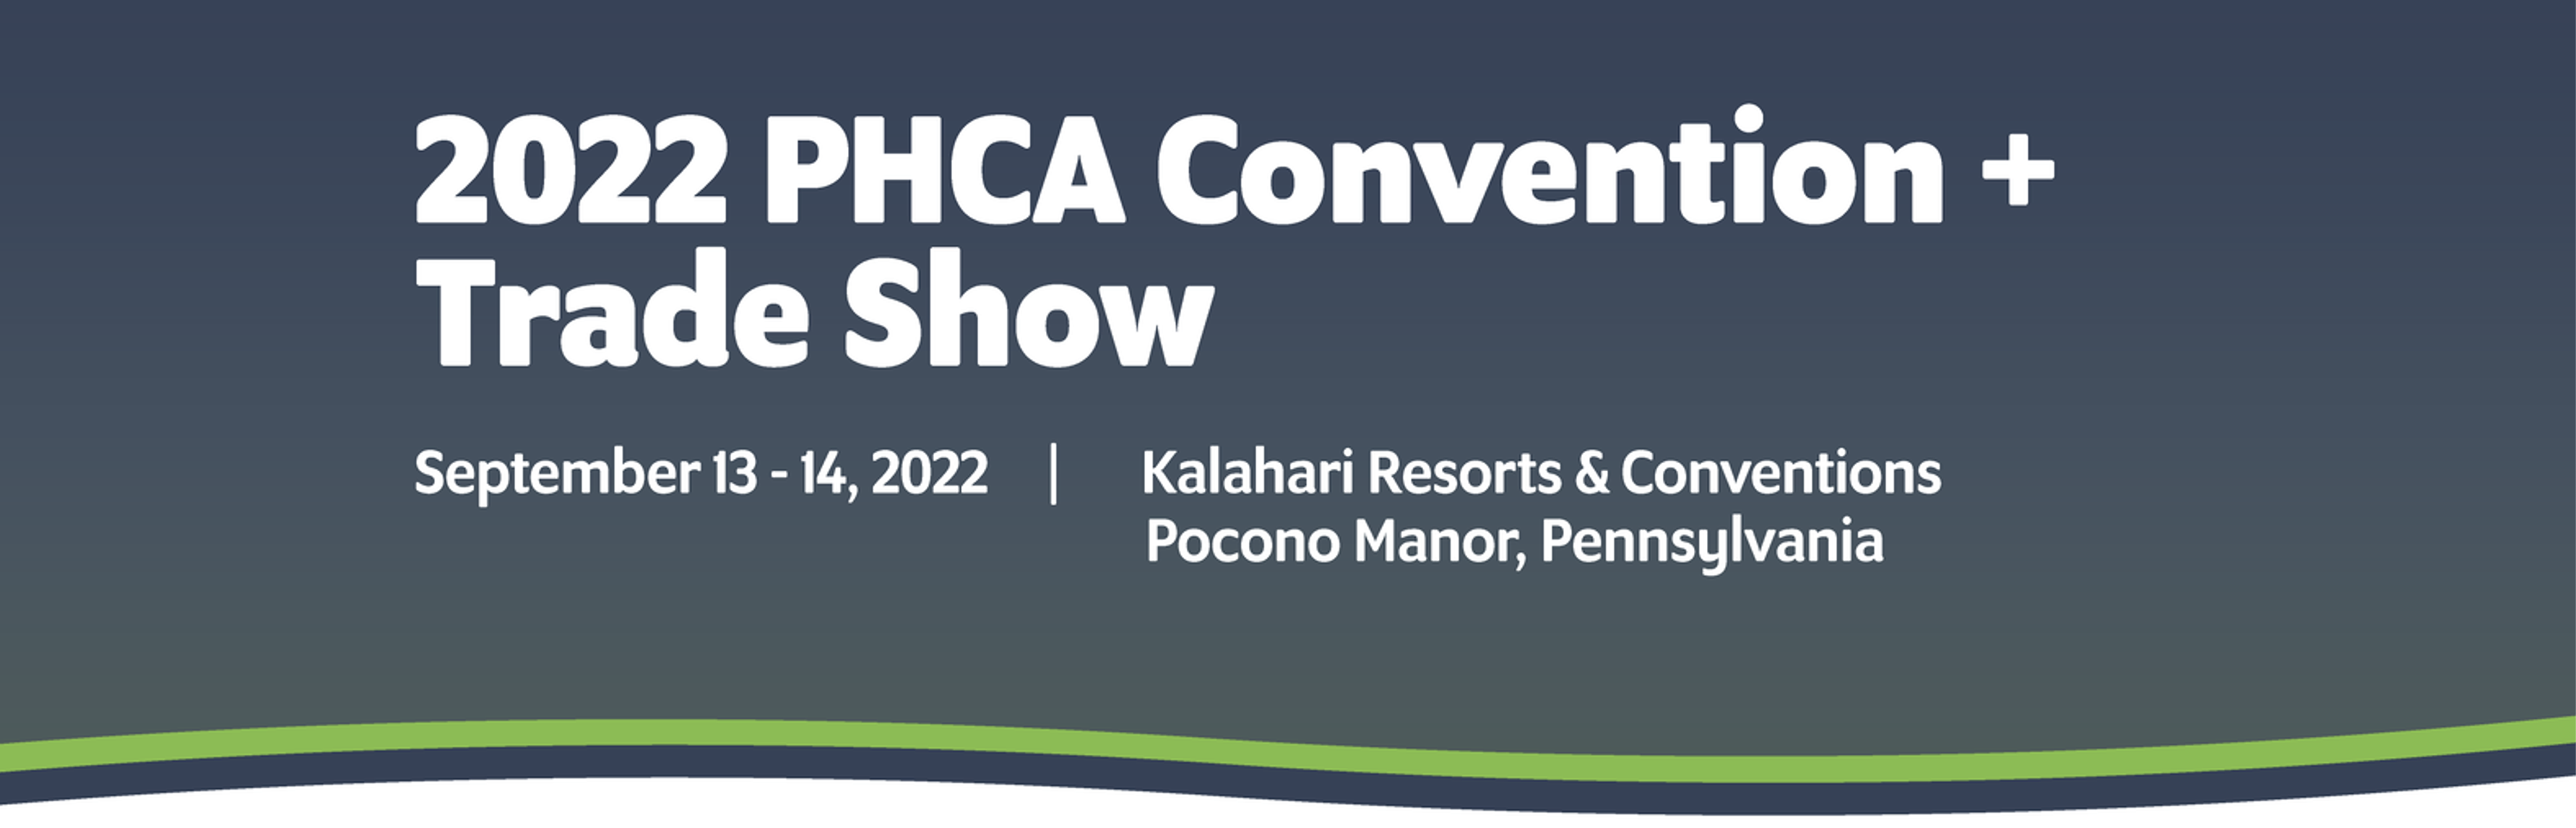 PHCA 2022 Annual Convention and Tradeshow IntelyCare